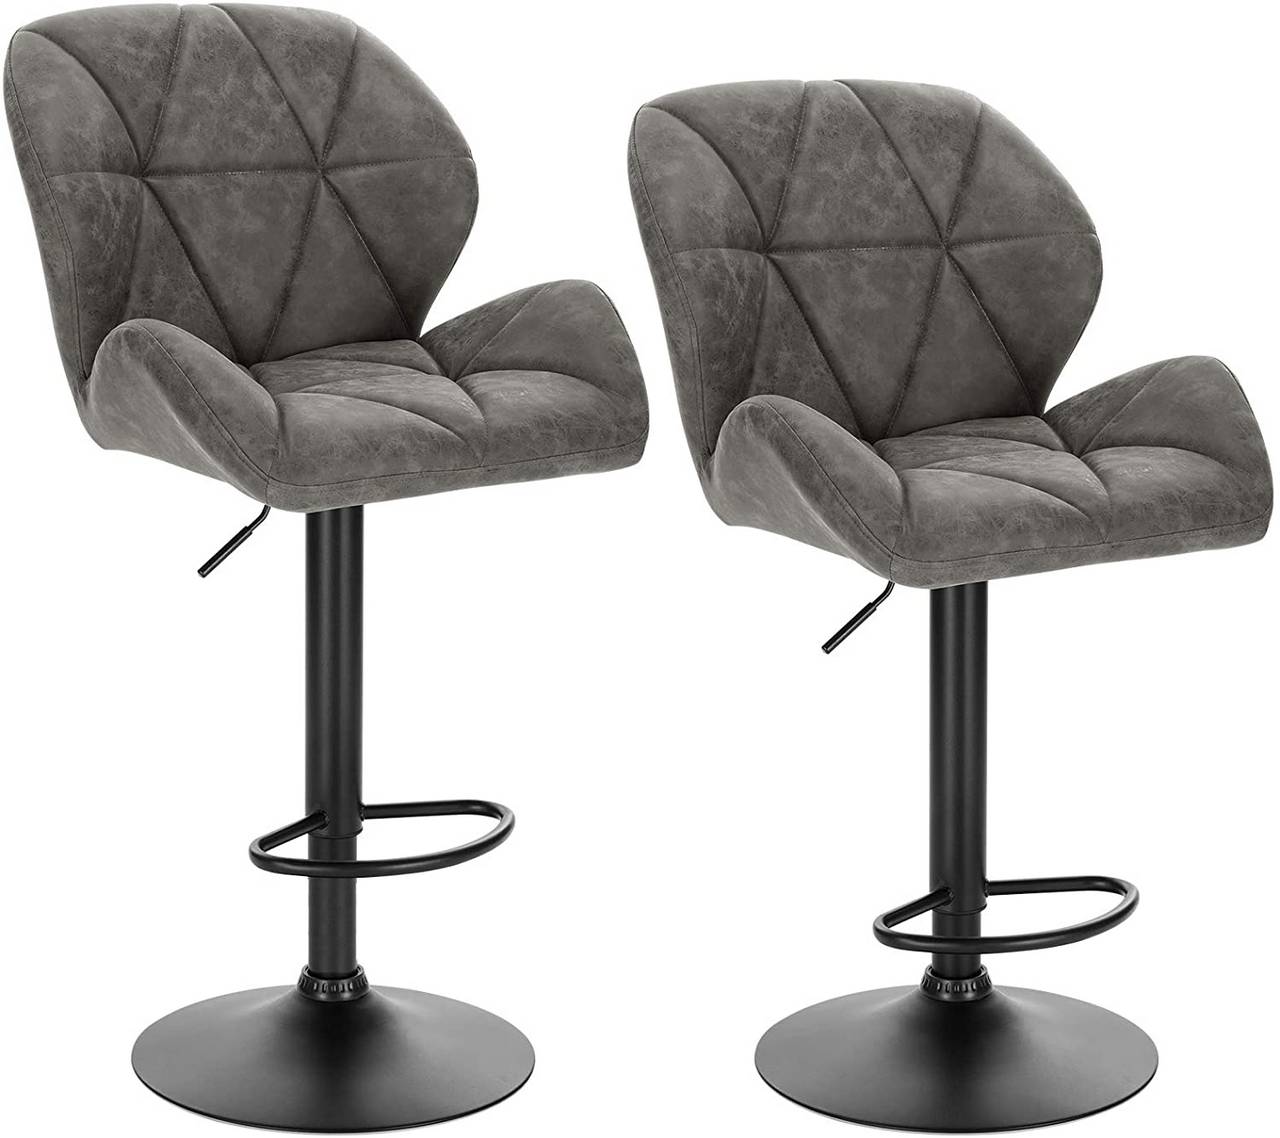 Set of 2 bistro bar of leather with made stools, stools stools, counter imitation backrest